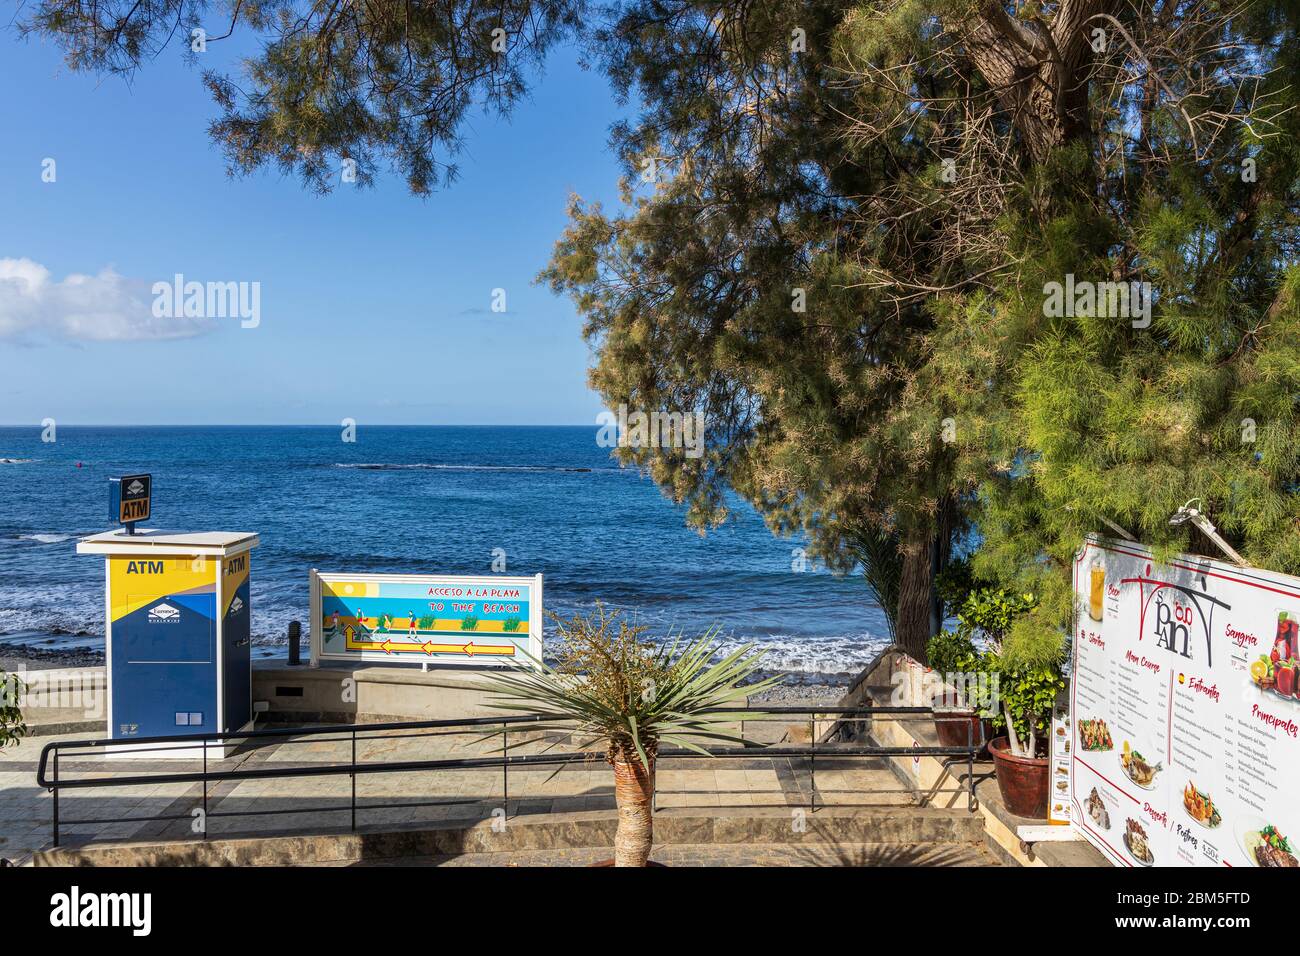 ATM machine and restaurant menu on a path to access Playa Fanabe beach during the Covid 19 State of Emergency in Costa Adeje, Tenerife, Canary Islands Stock Photo